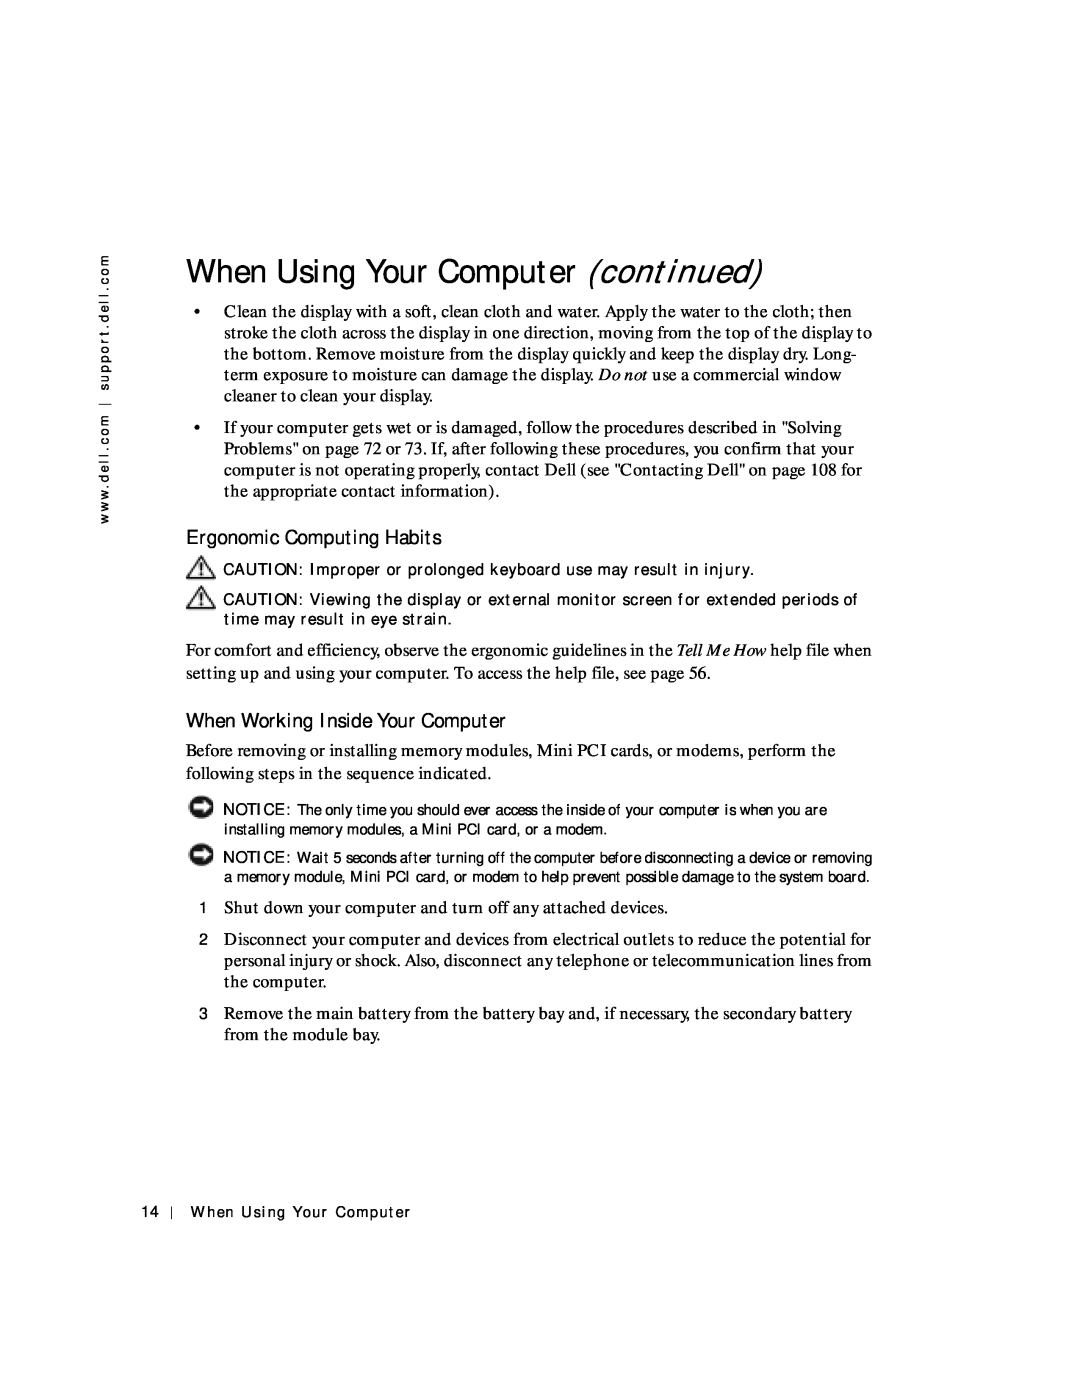 Dell 4150 owner manual When Using Your Computer continued, Ergonomic Computing Habits, When Working Inside Your Computer 